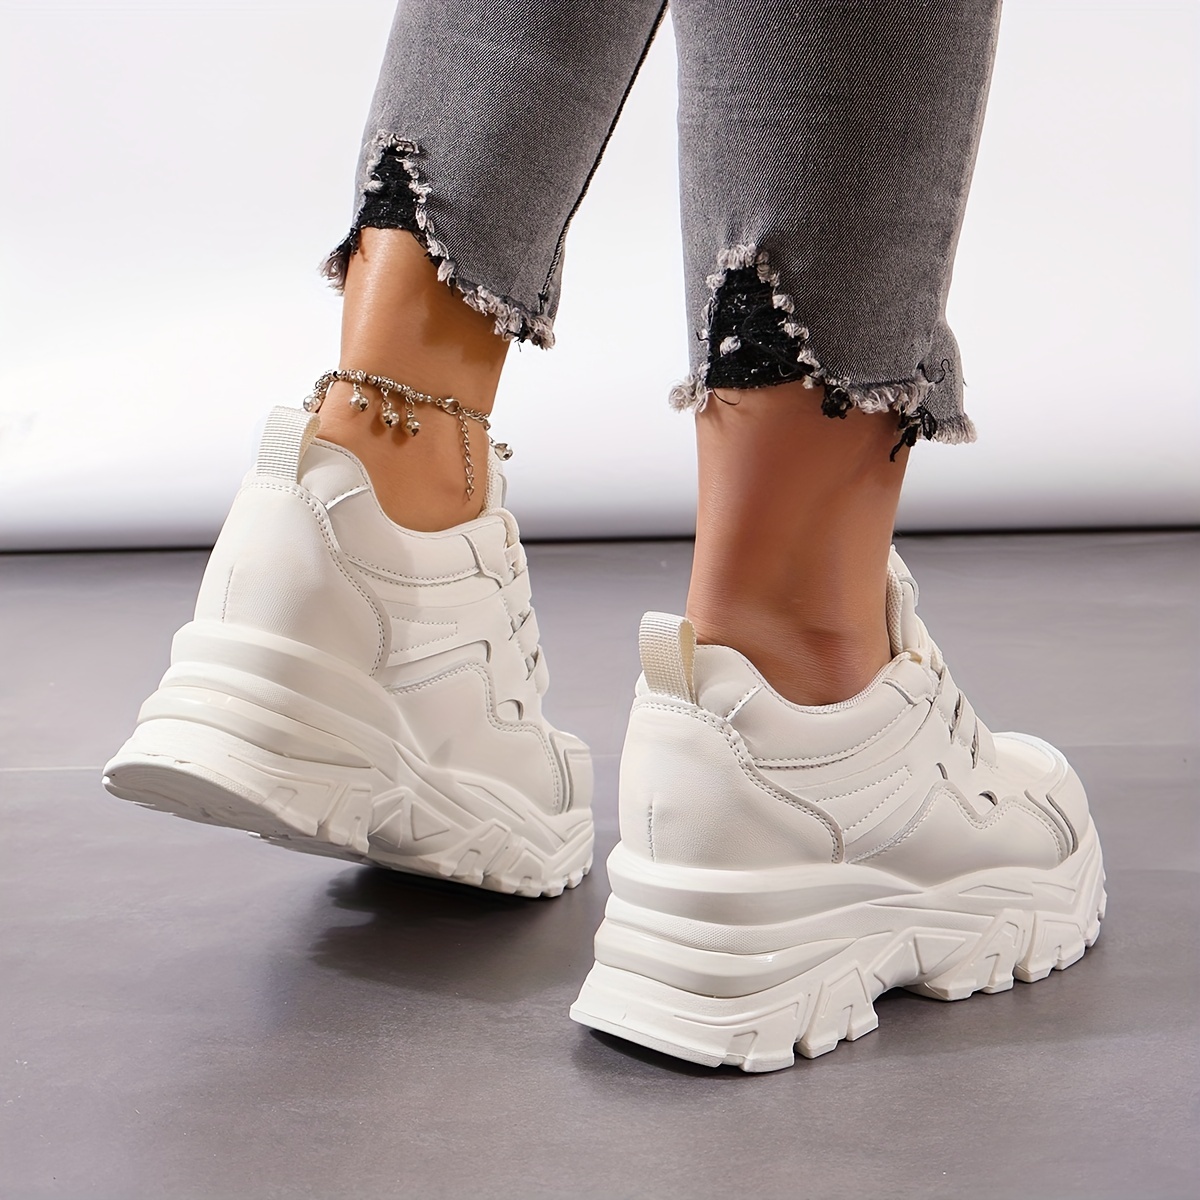 high fashion sneakers for women